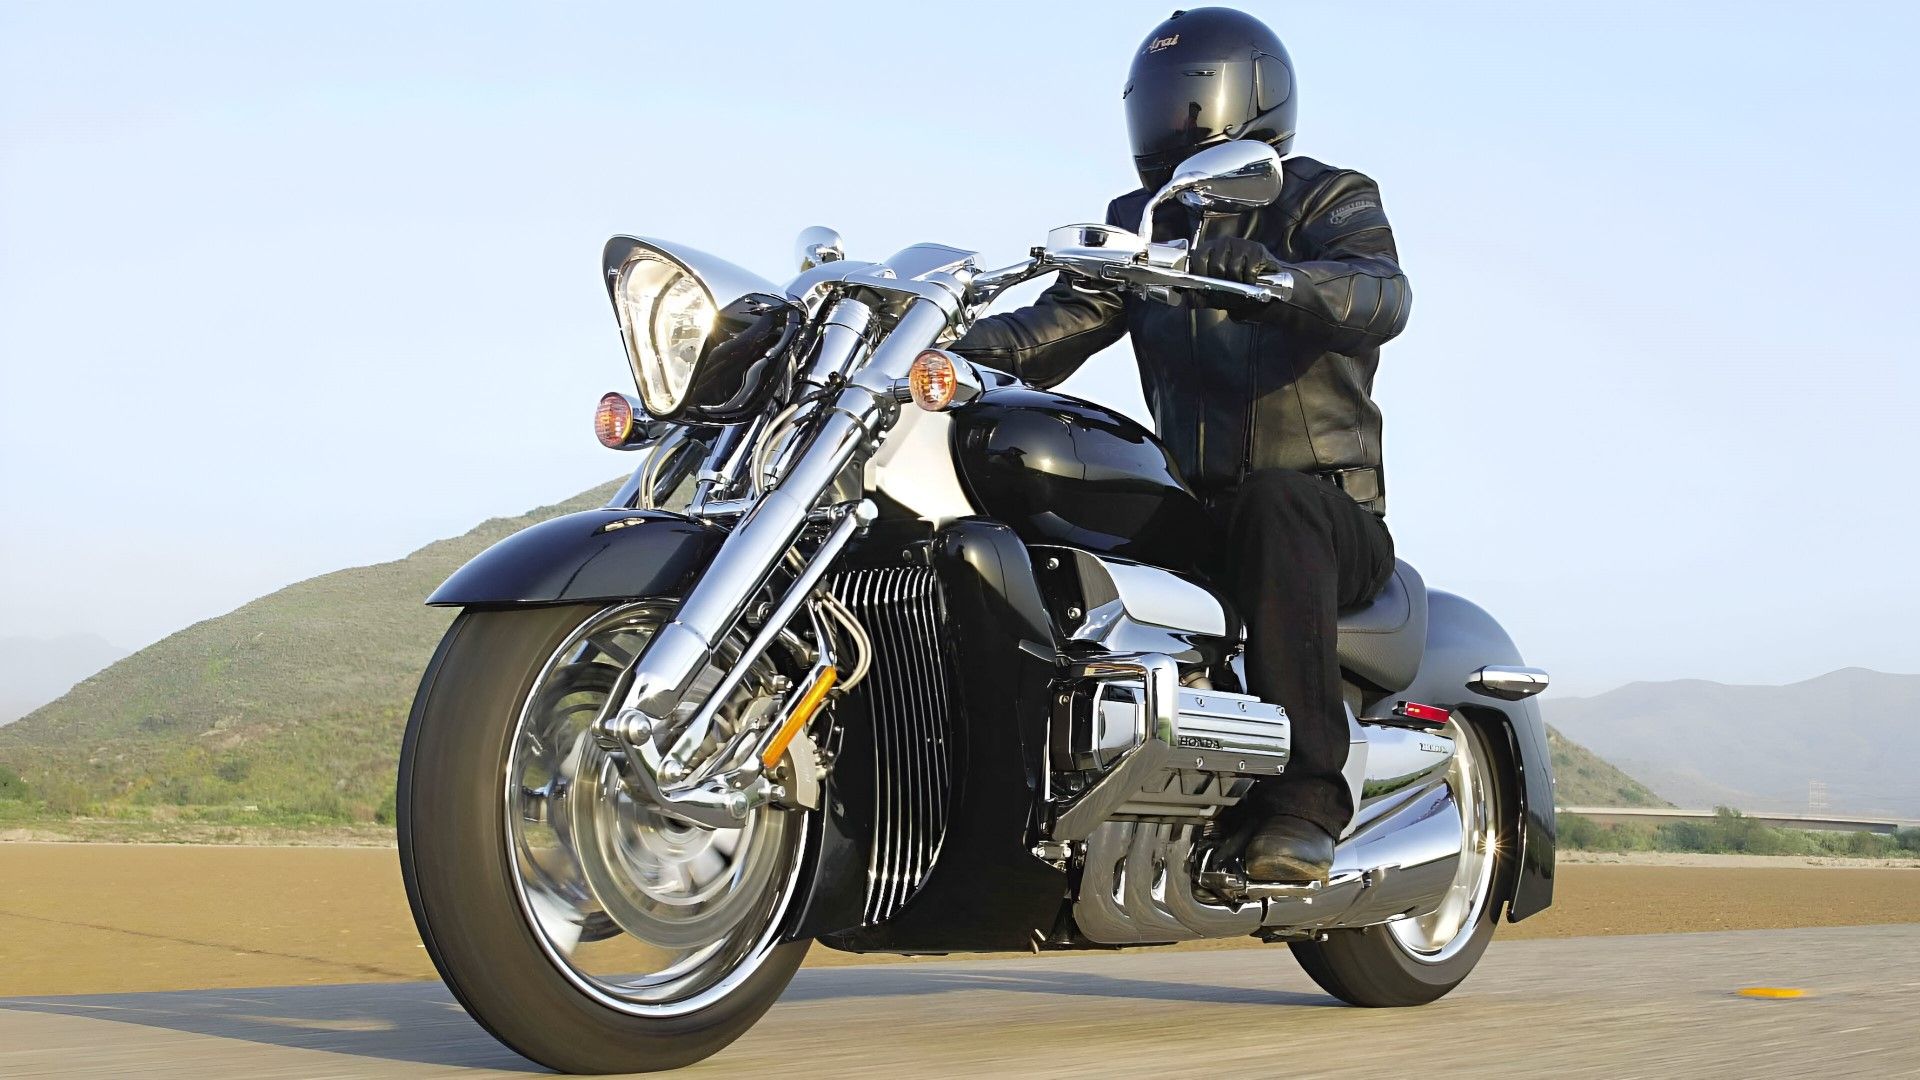 2004 Honda Valkyrie Rune accelerating on the road front third quarter view